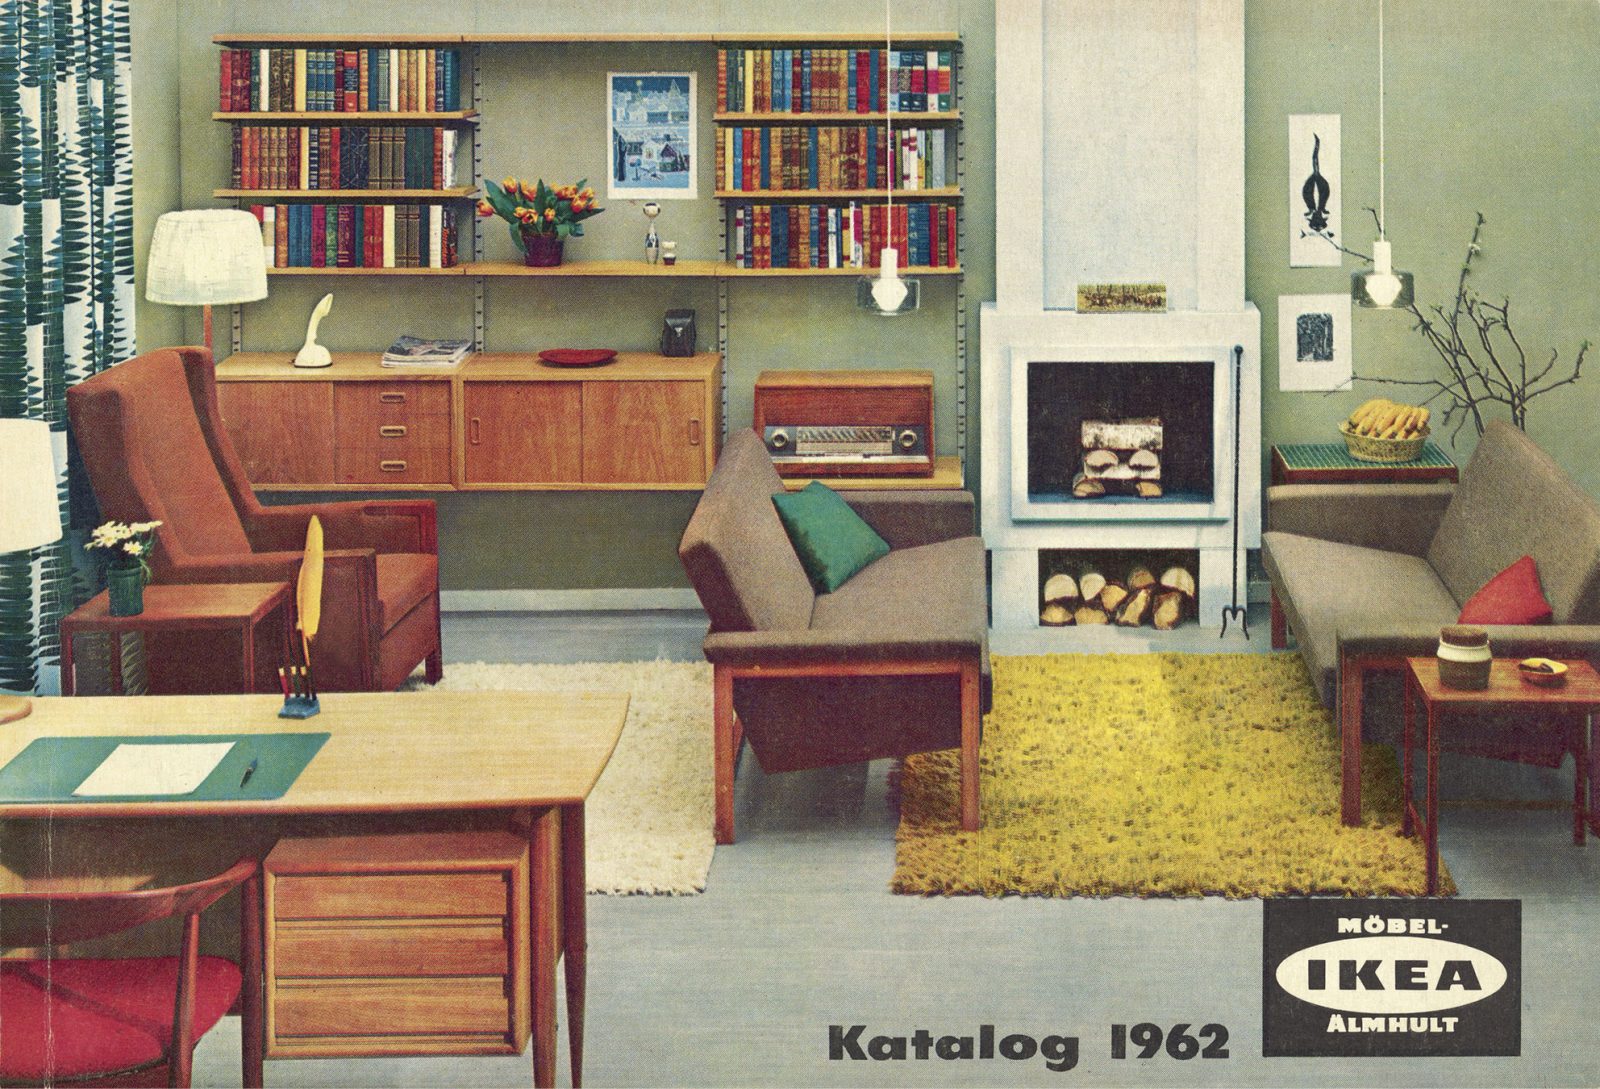 IKEA catalogue cover from 1962 with desk, seating areas and fireplace.